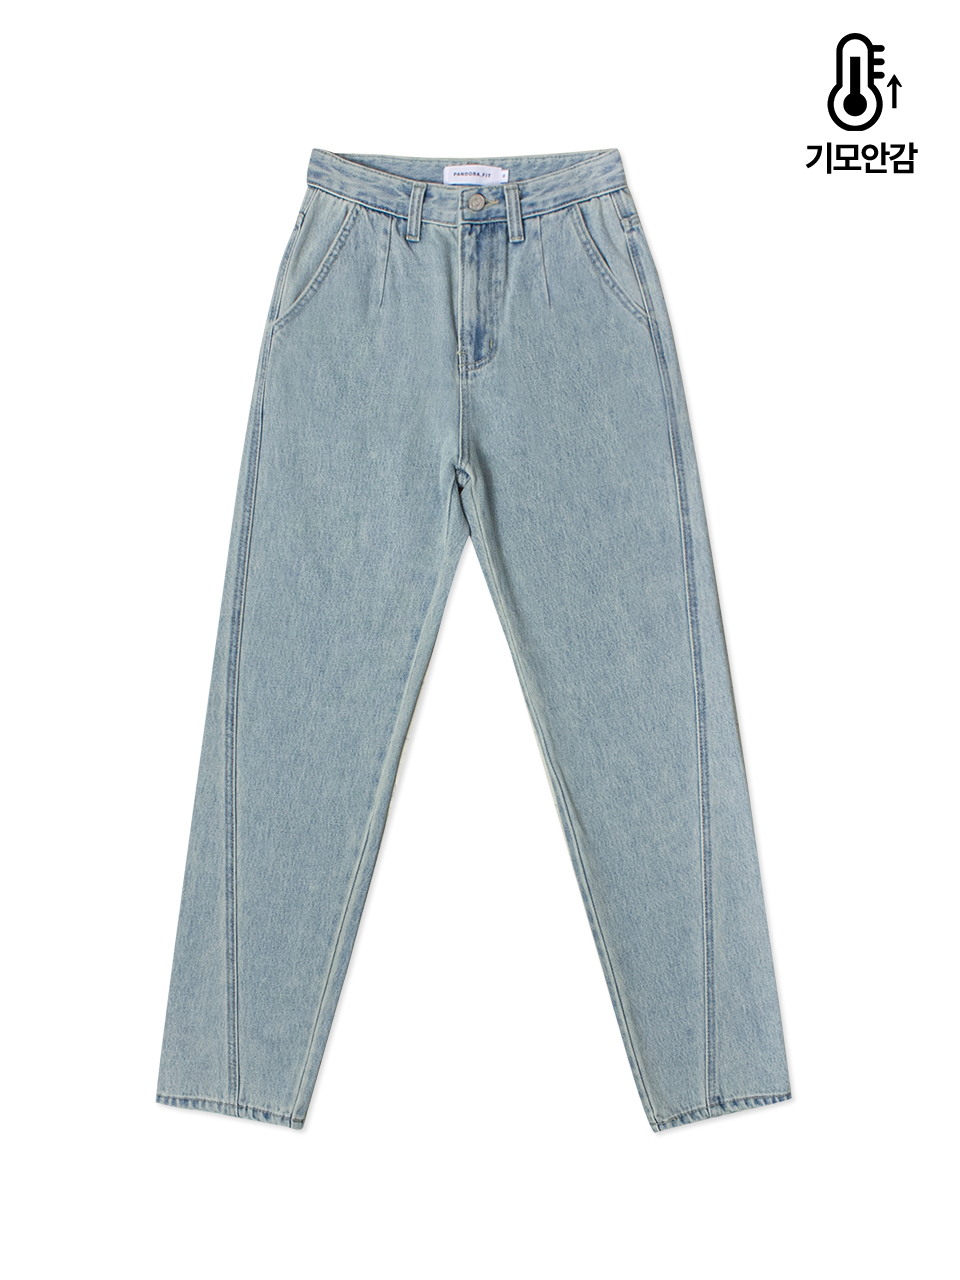 [WIDE] Crunky Jeans